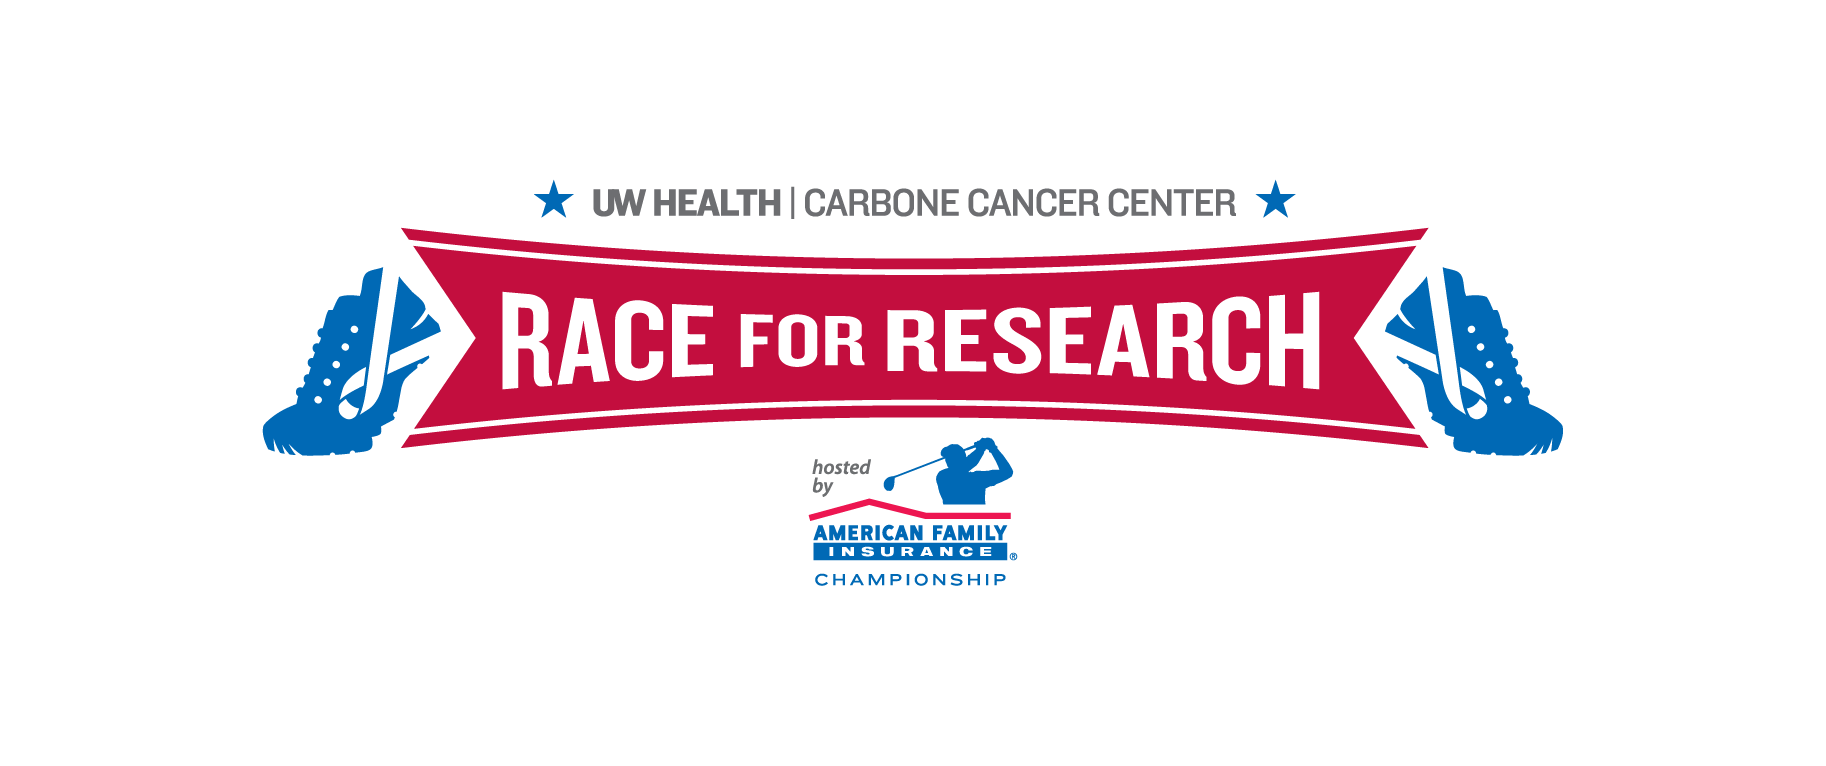 UW Carbone&#39;s Race for Research